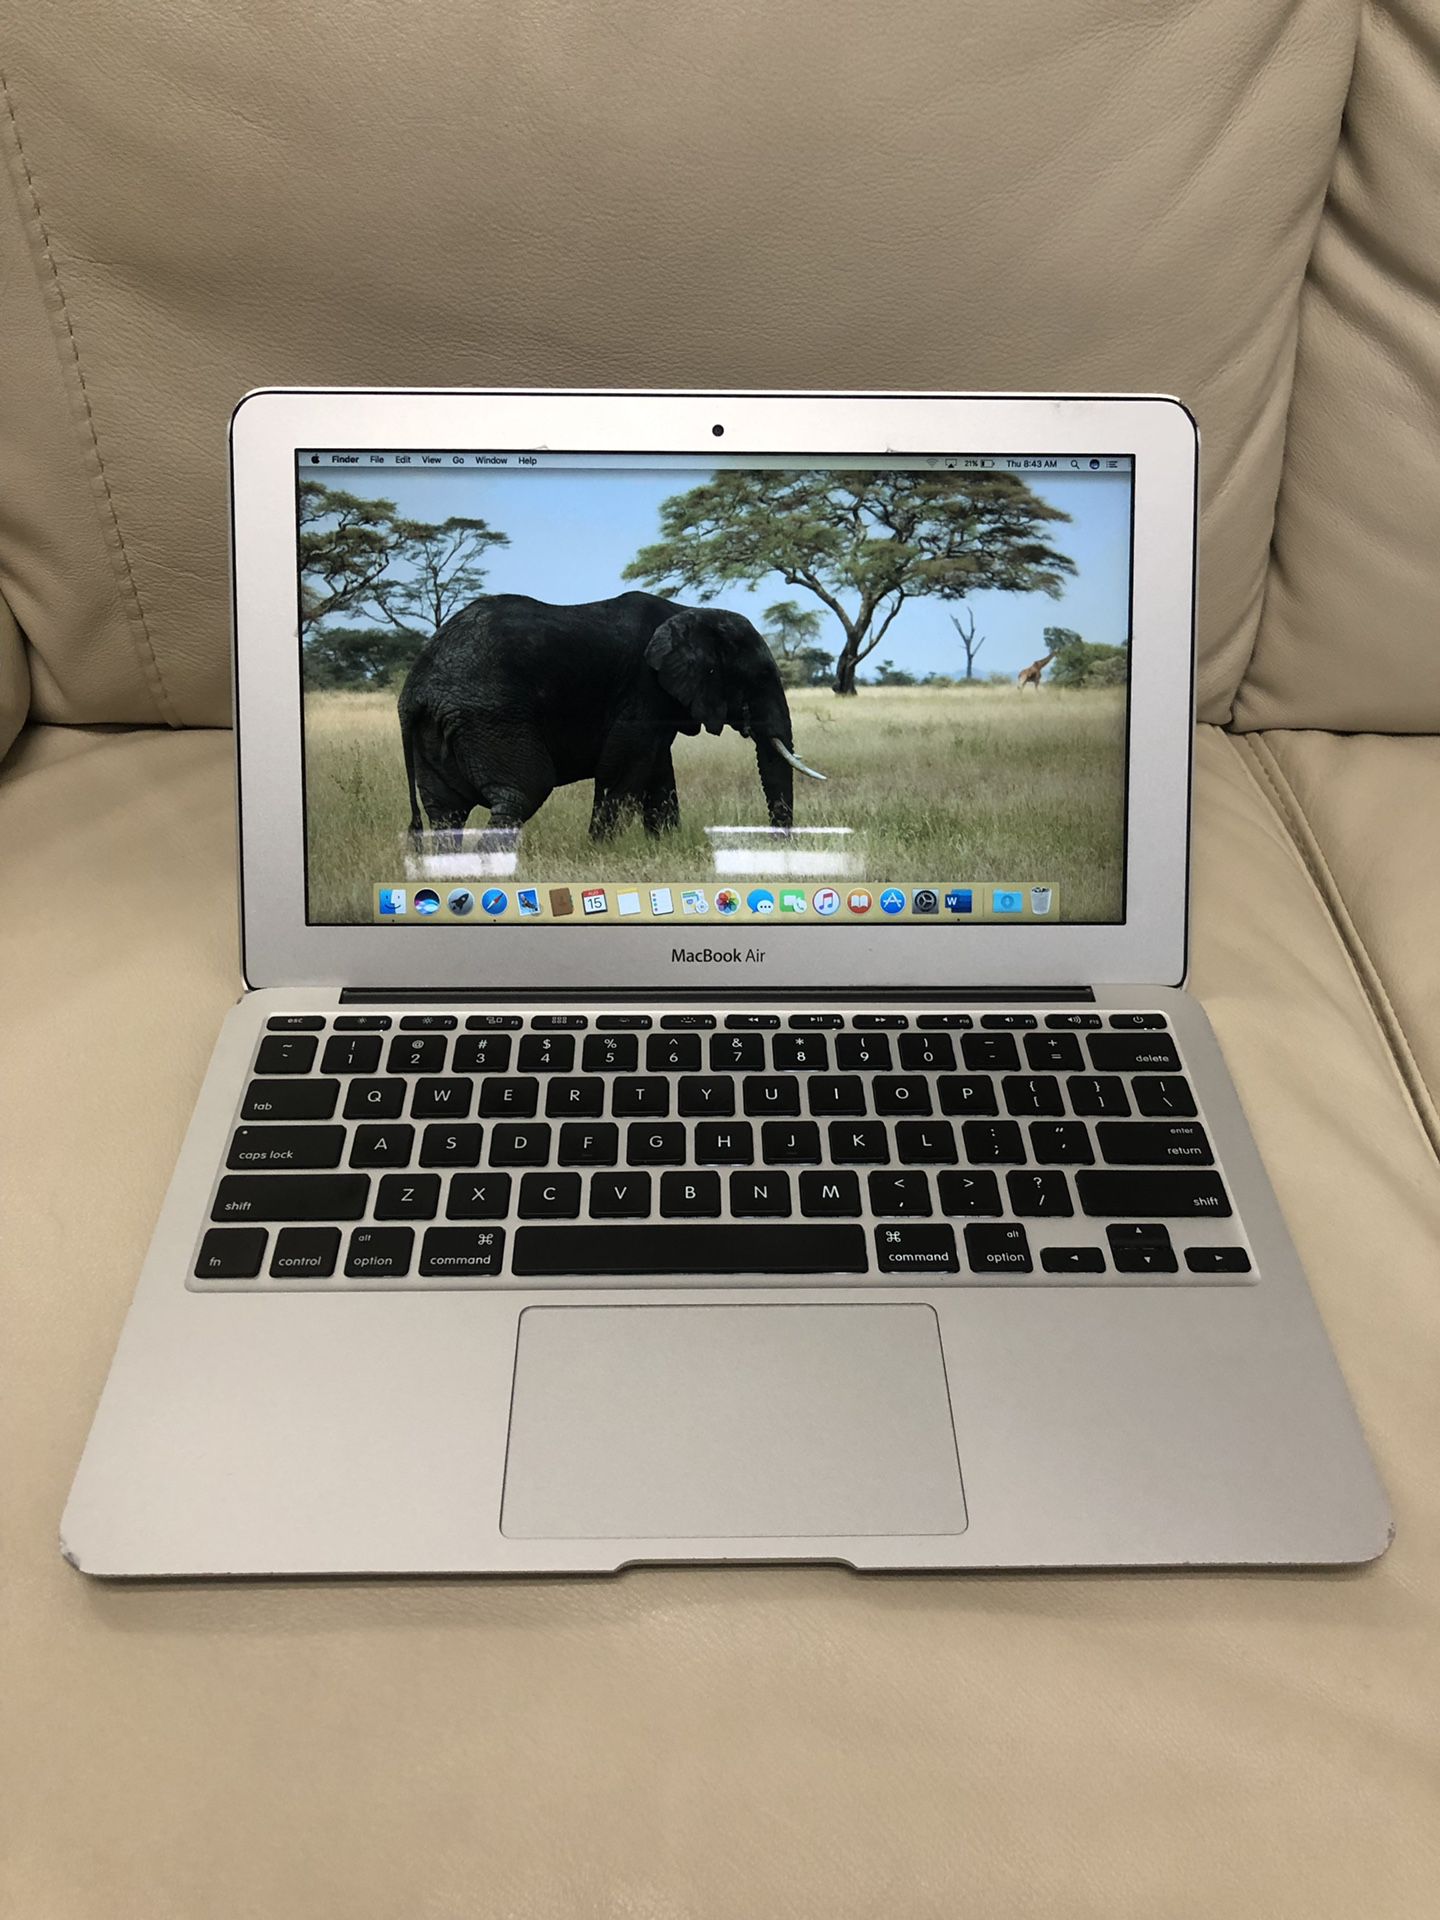 Apple MacBook Computer Air. 11”. Mid 2011. 4gb ram. 64 SSD. Sierra OS. 1.6ghz intel i5 64gb. Loaded with Microsoft Office 365 Pro